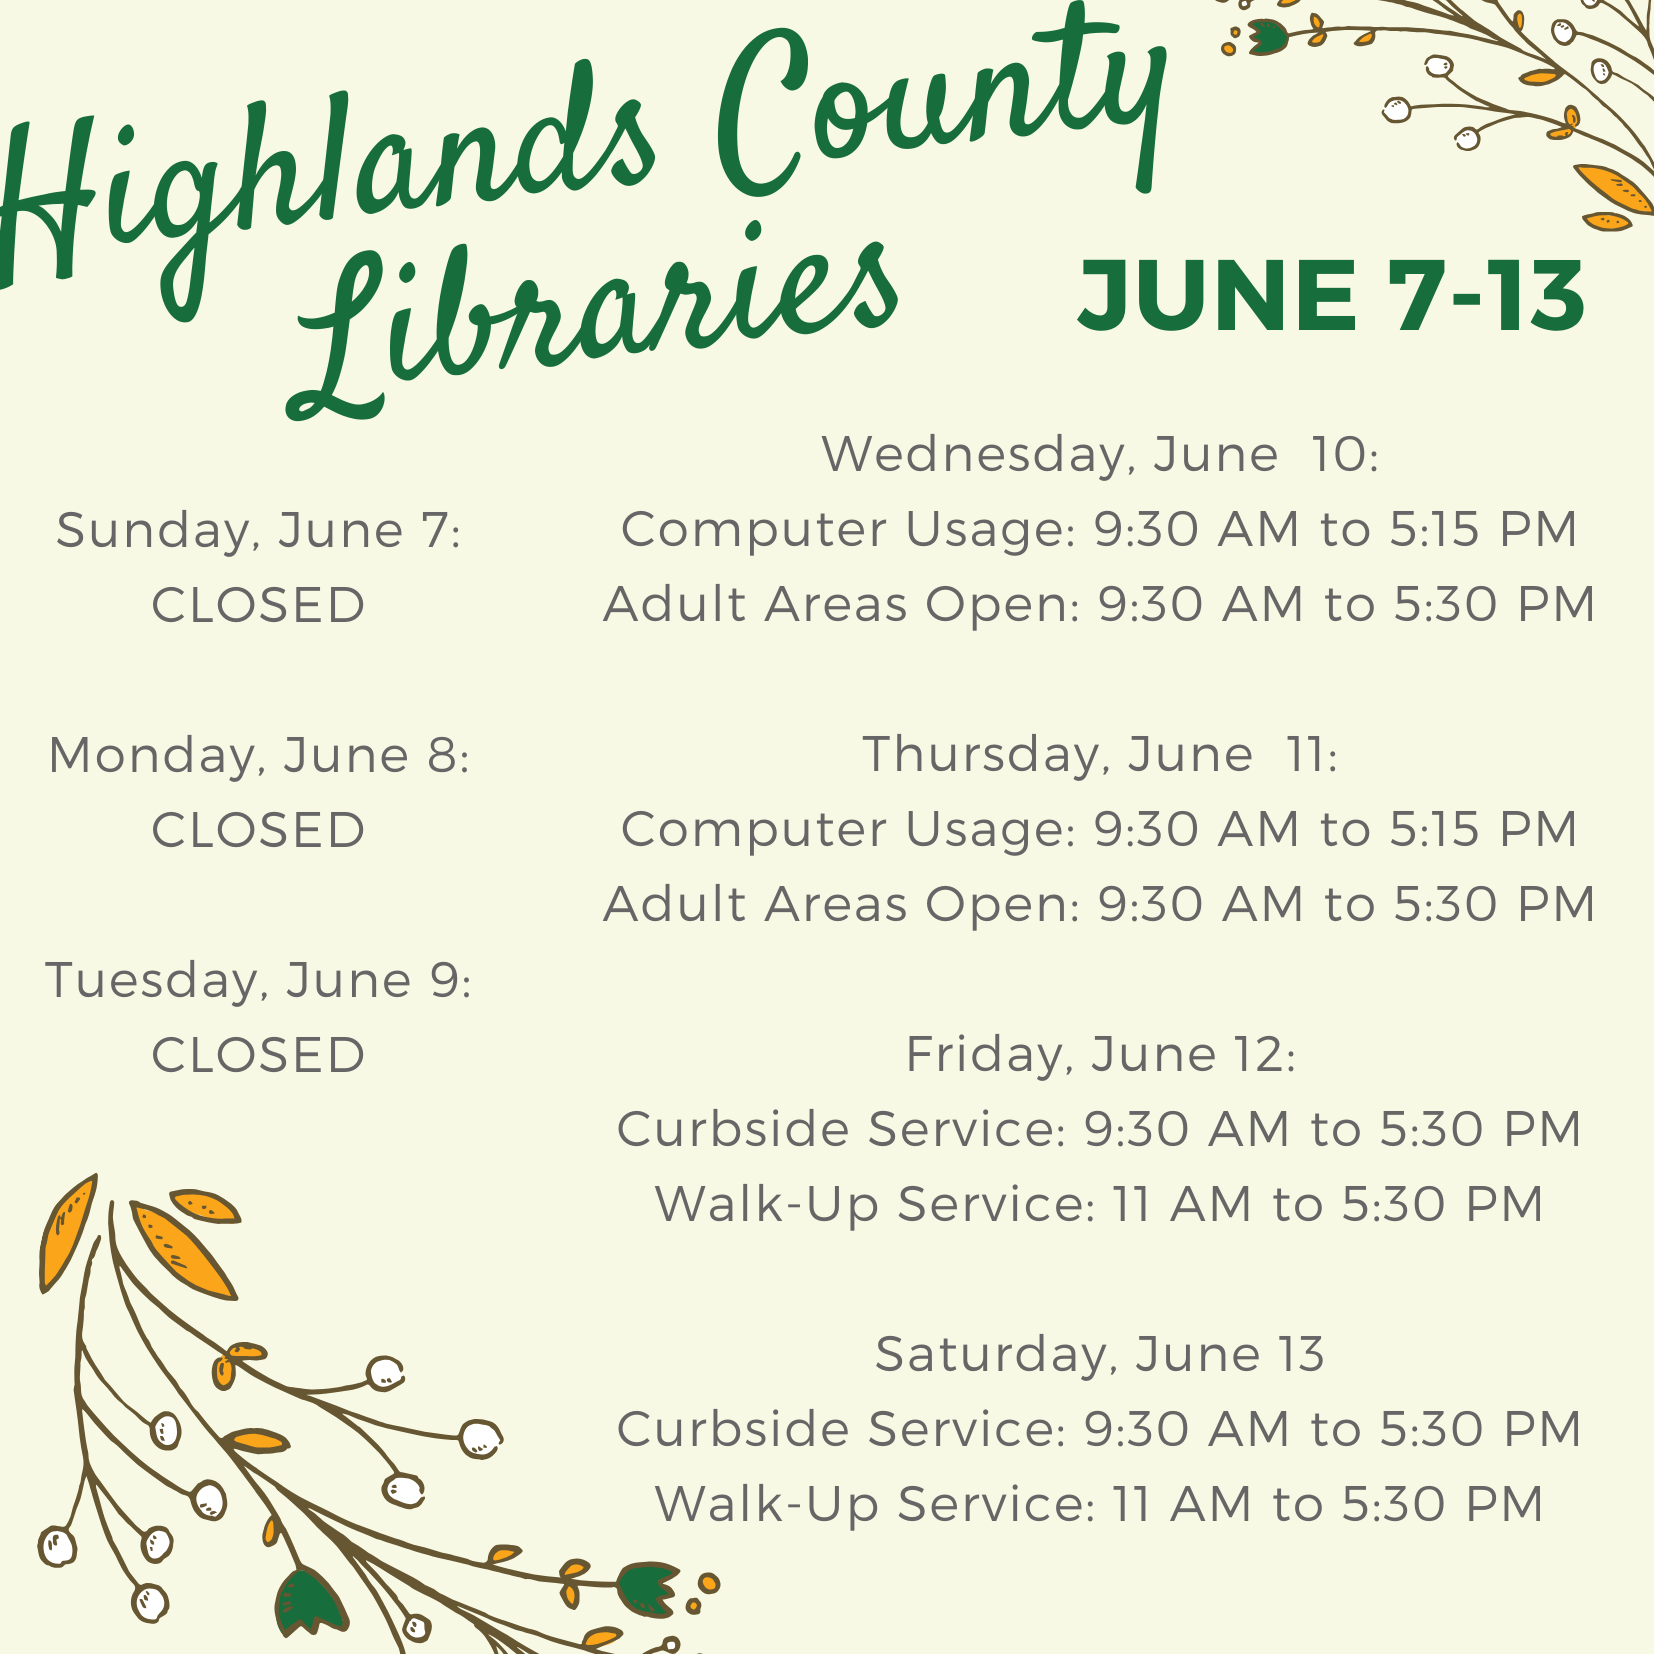 This week's schedule for Highlands County Libraries: Sunday to Tuesday: CLOSED Wednesday & Thursday: Computer Usage & Adult Areas Open Friday & Saturday: Curbside Service & Walk-Up Service. Details to follow later in the week for all of these services. For assistance, call 863-402-6716